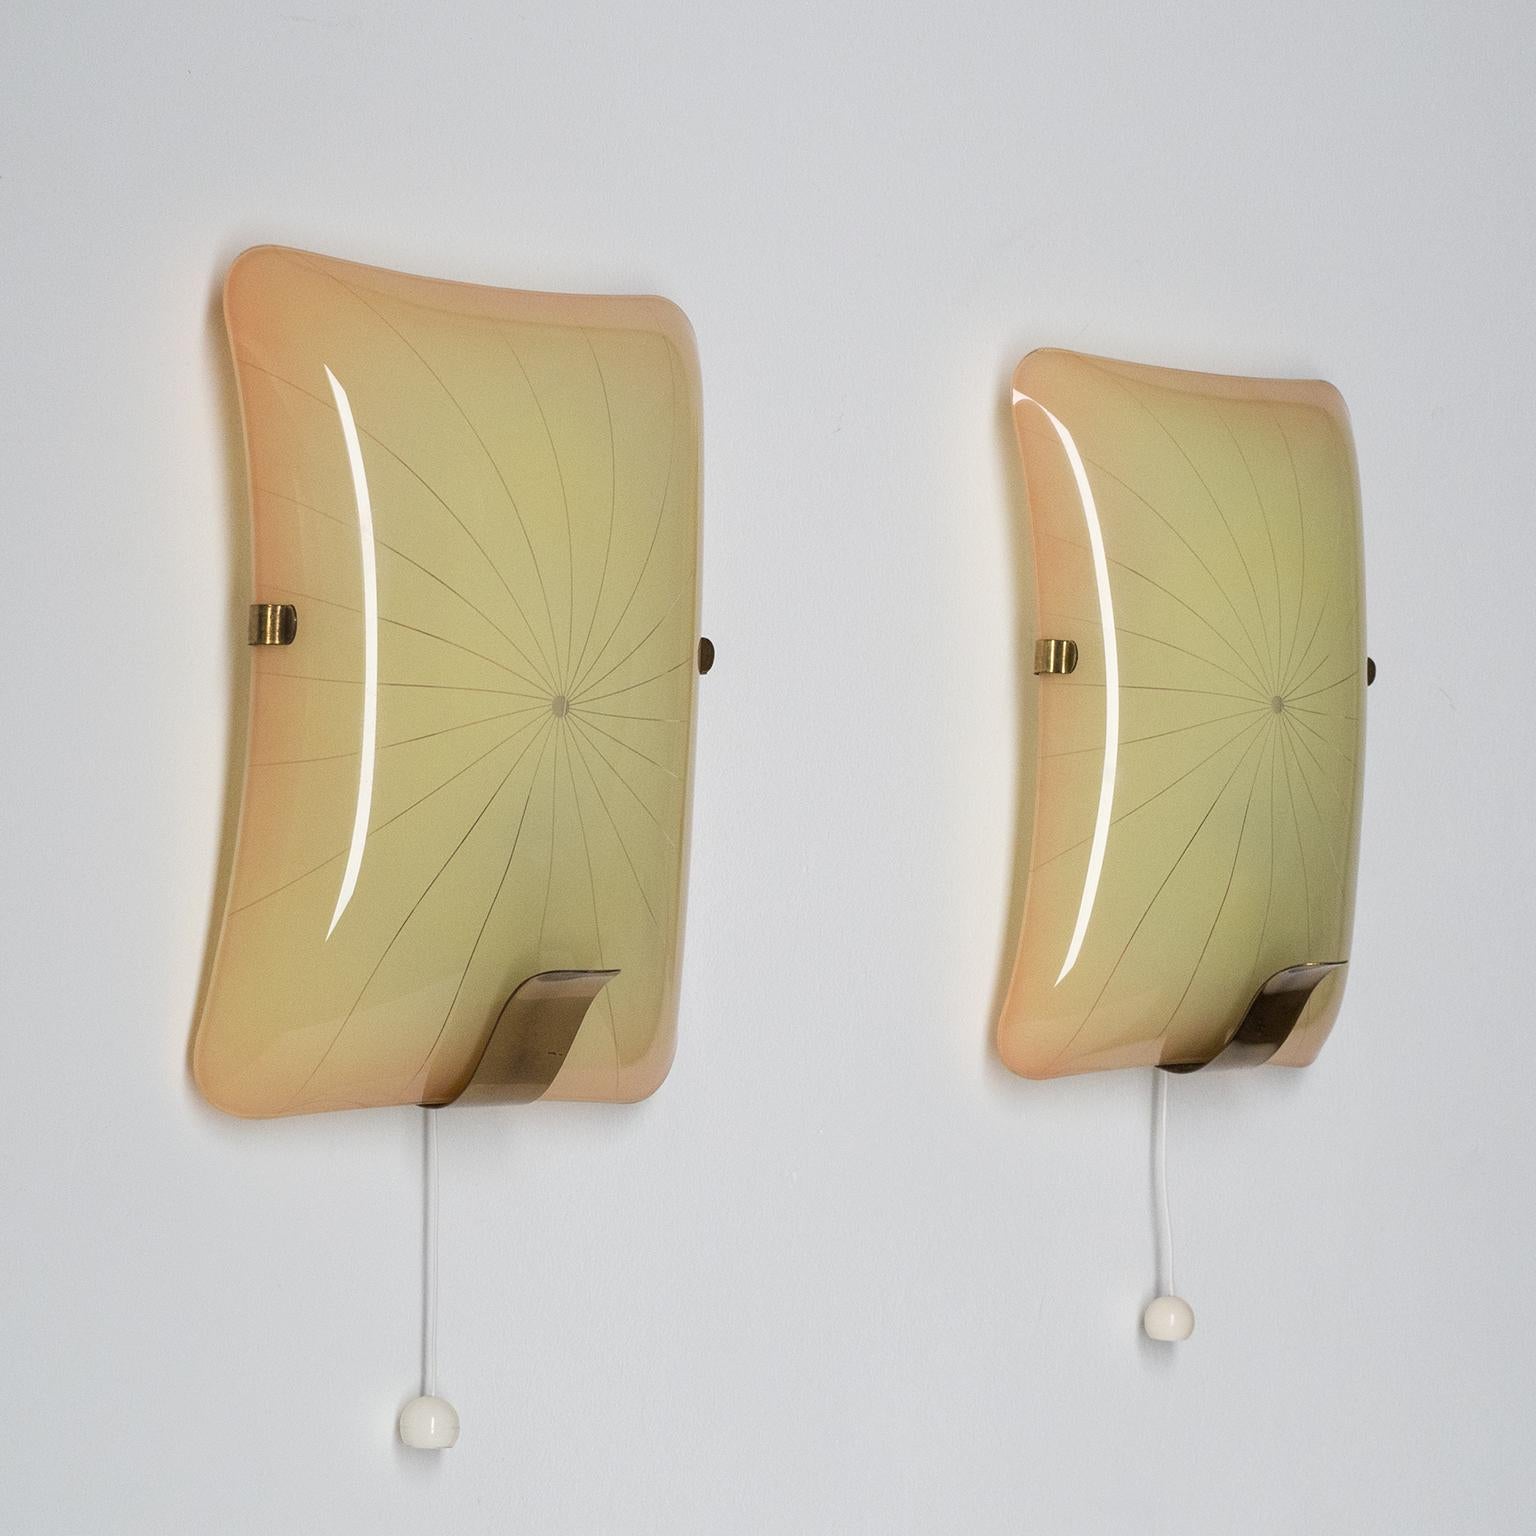 Pair of Art Deco Sconces, 1940s, Enameled Glass and Brass 9